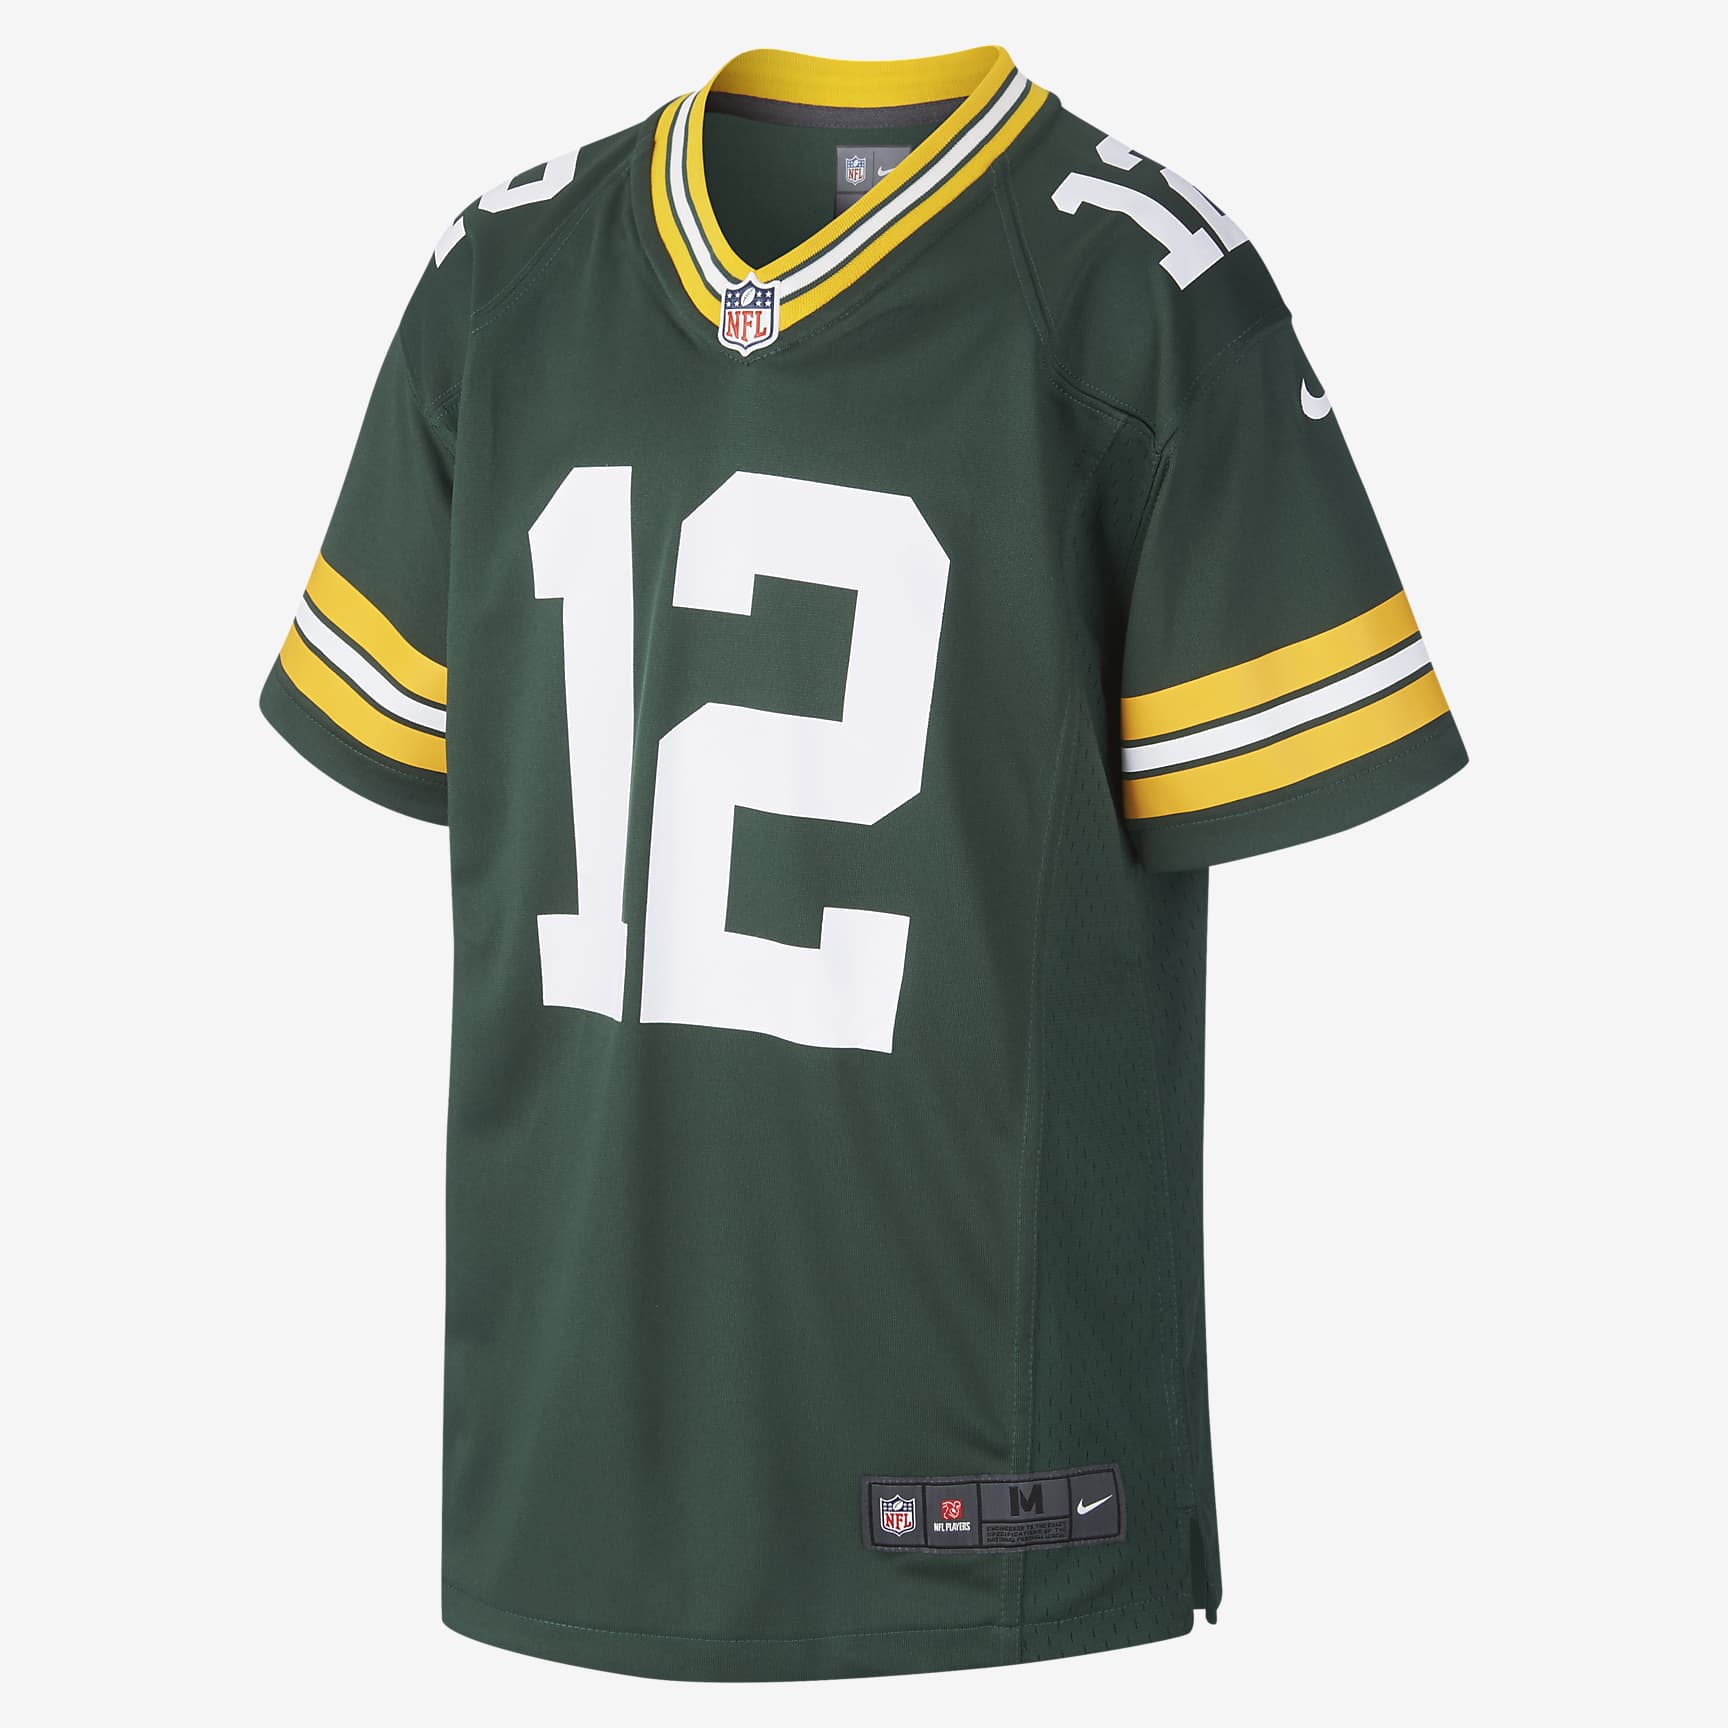 NFL Green Bay Packers Game Jersey (Aaron Rodgers) Older Kids' American